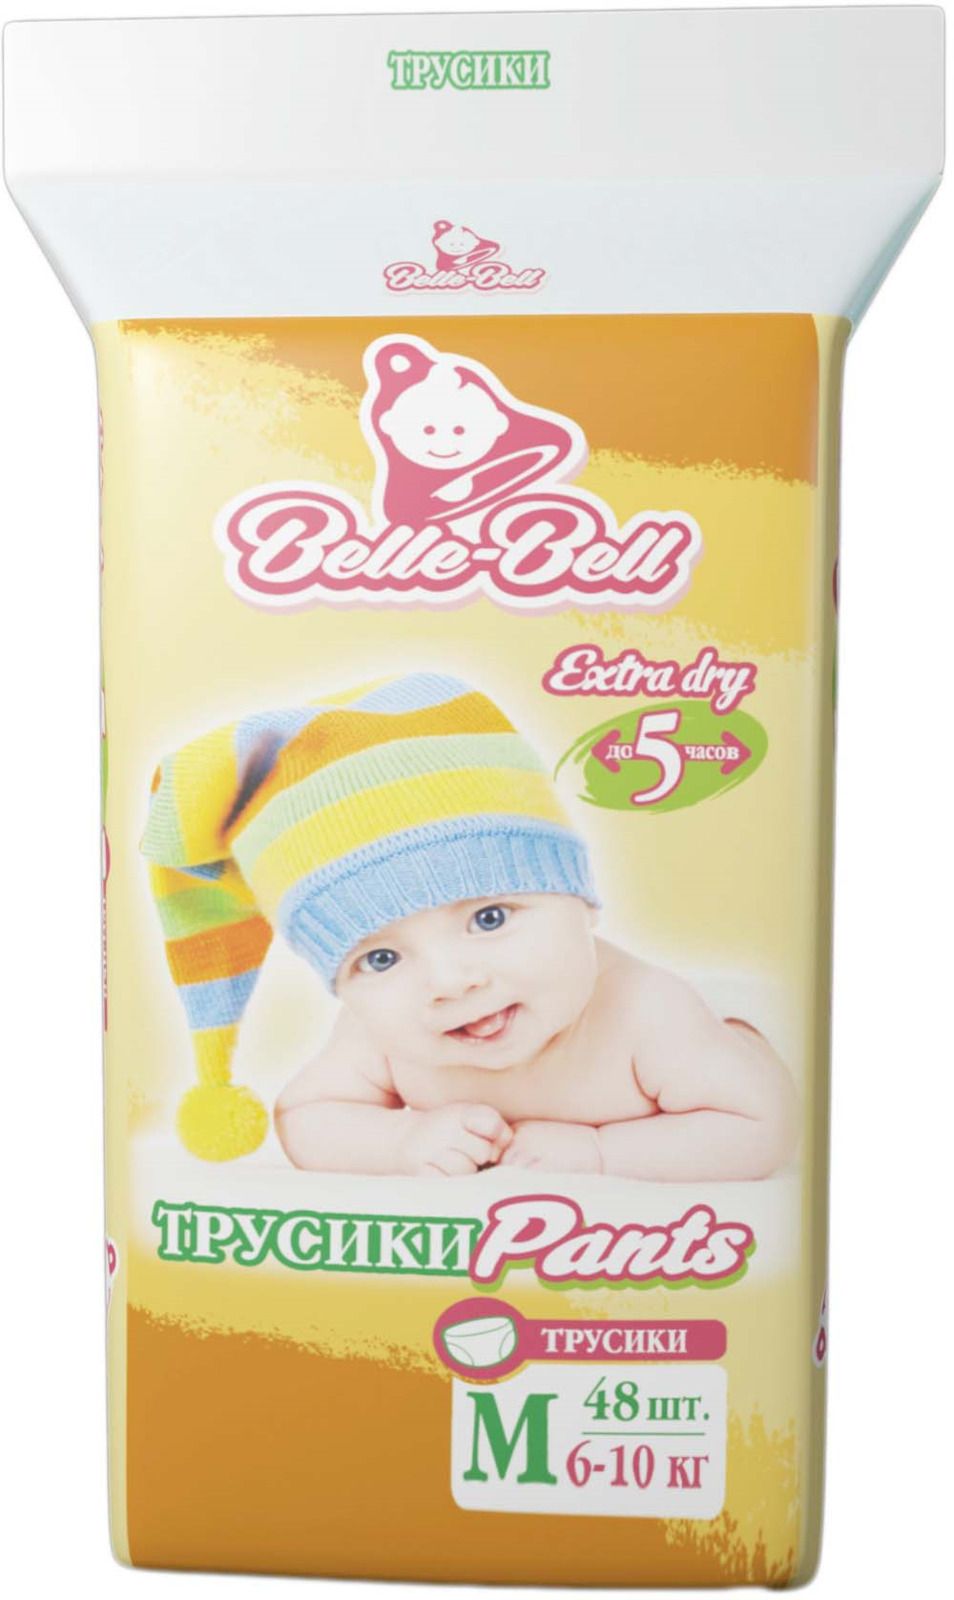 - Belle-Bell Extra dry,  M, 6-10 , 48 